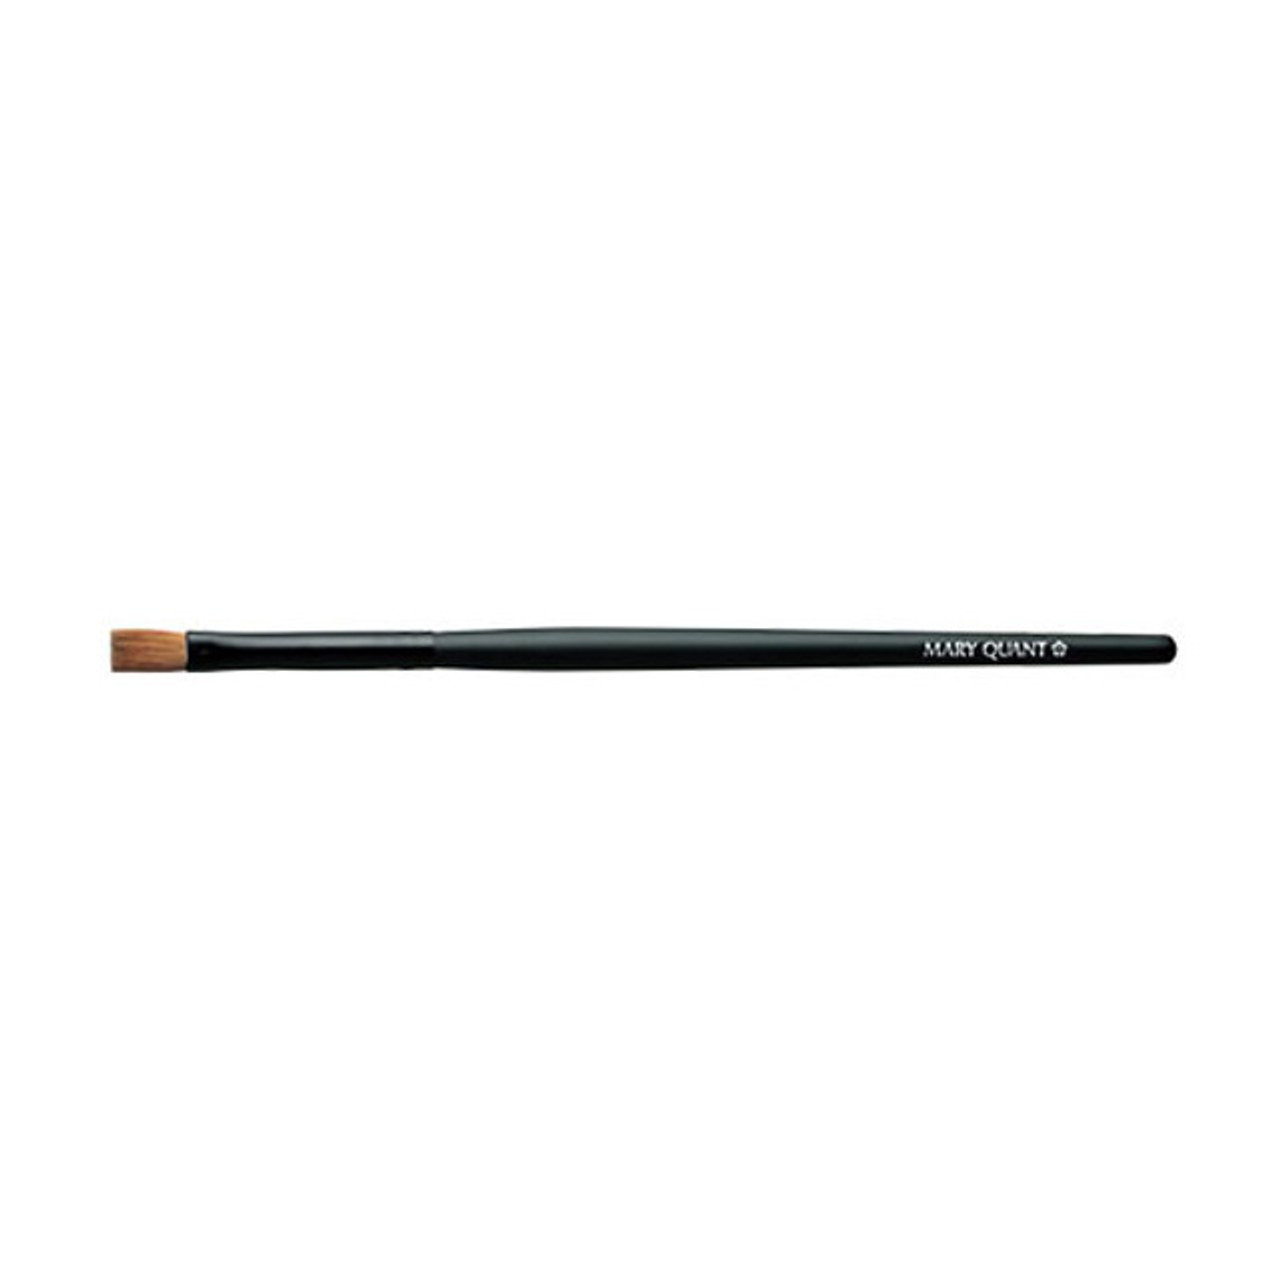 The Lip Brush is pictured, it is a slim, precise brush with brown bristles and a long black handle with the Mary Quant Daisy printed on it.